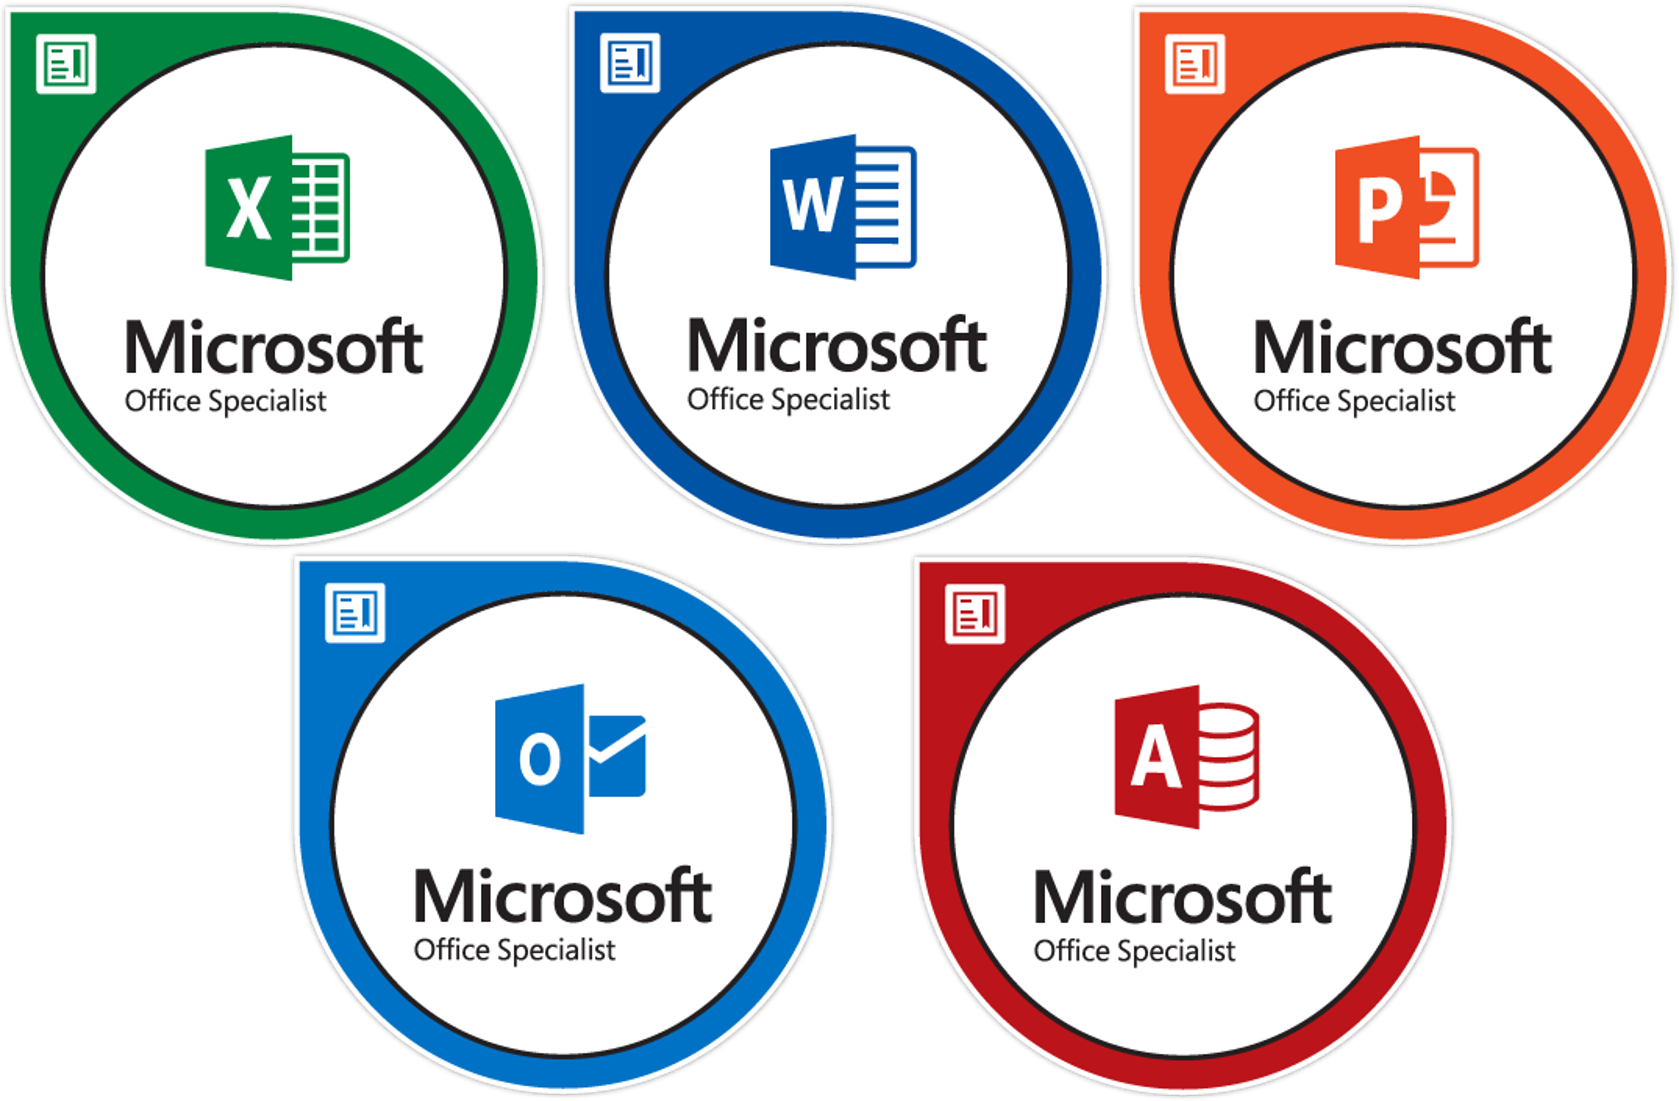 Microsoft Office Specialist Certification for Office 2016